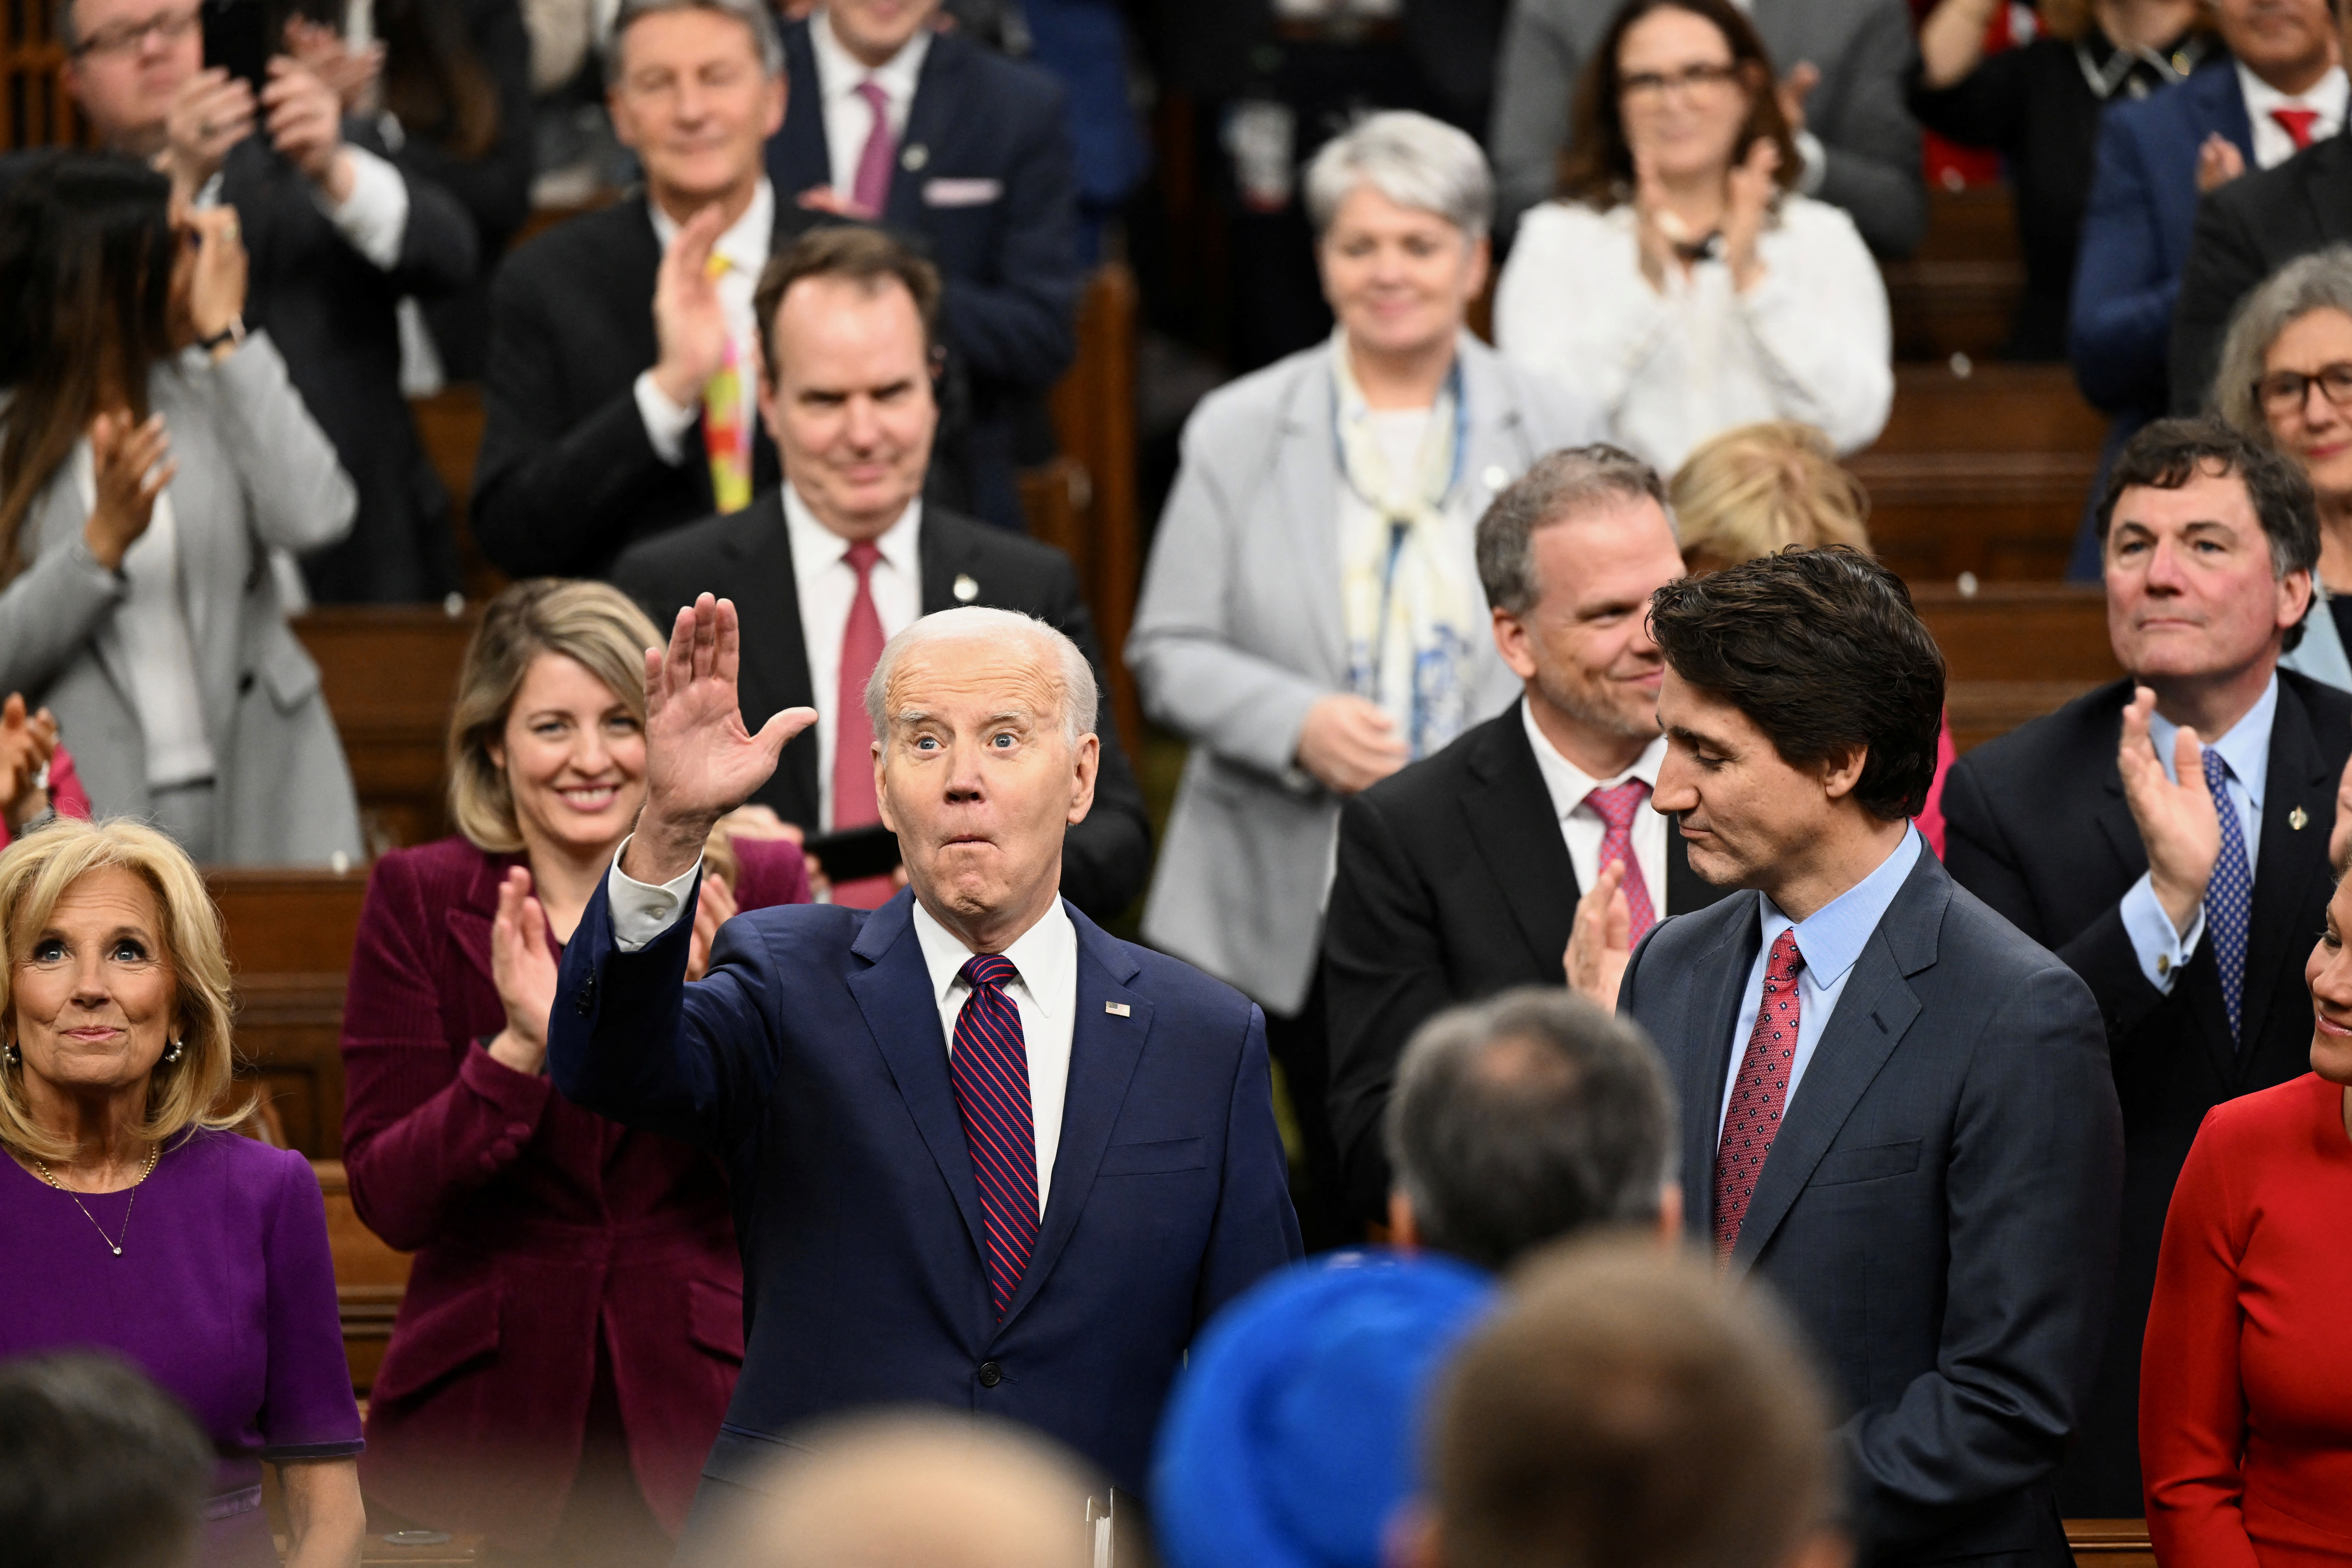 U.S. President Biden and Canadian Prime Minister Trudeau attend an address at the Canadian Parliament, in Ottawa